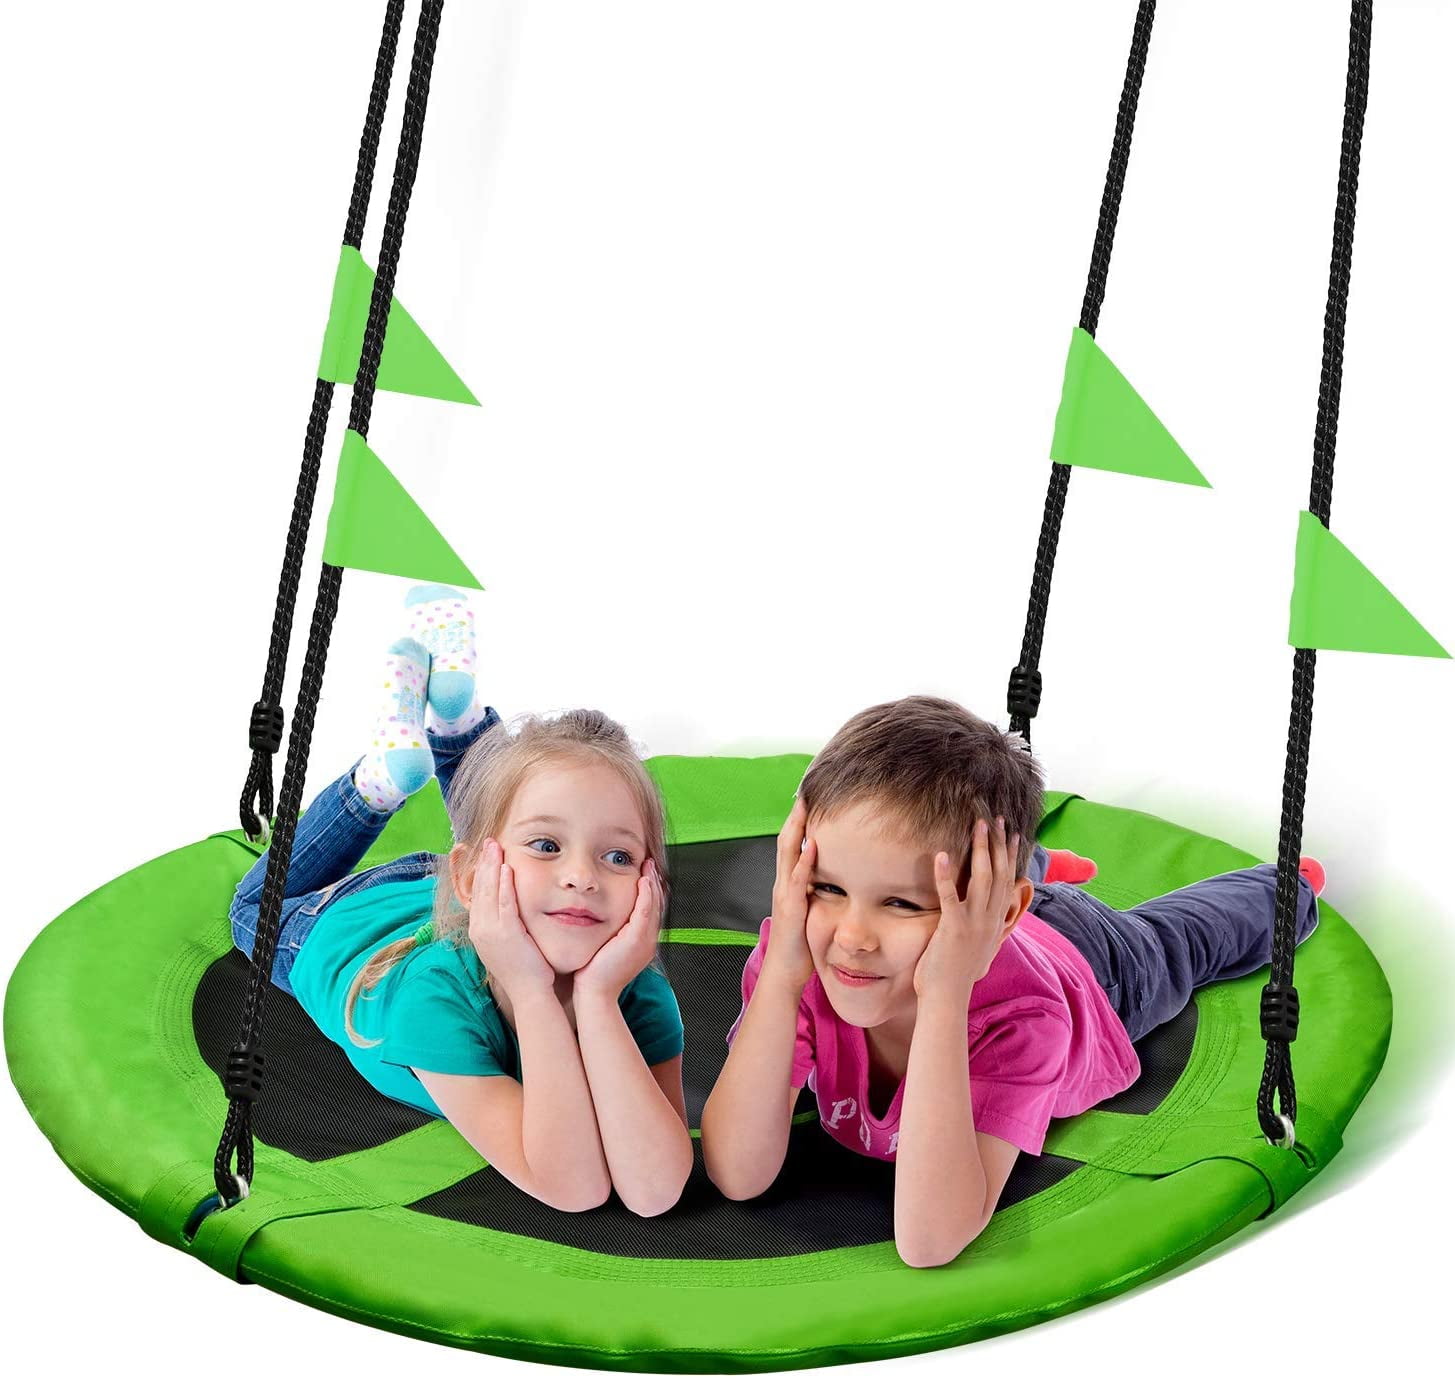 Swing Set Adjustable Multi-Strand Ropes,Great for Tree Backyard Easy to Install Playground 660 lbs Weight Capacity 40 Round Swing with Hanging Kit Saucer Tree Swing for Kids Indoor Outdoor 